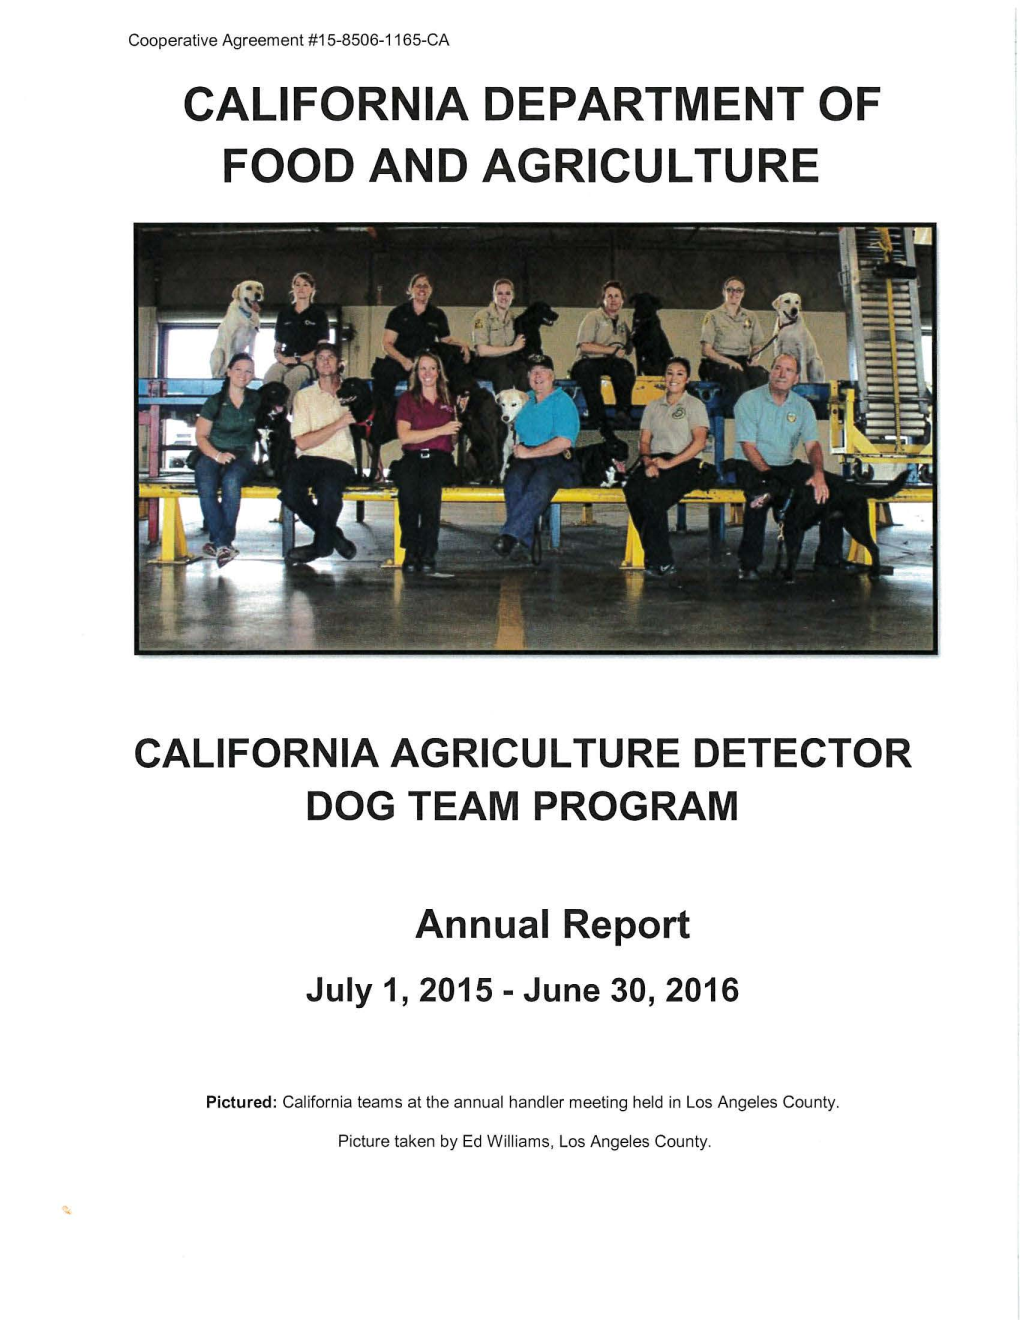 California Agriculture Detector Dog Team Program, Annual Report, July